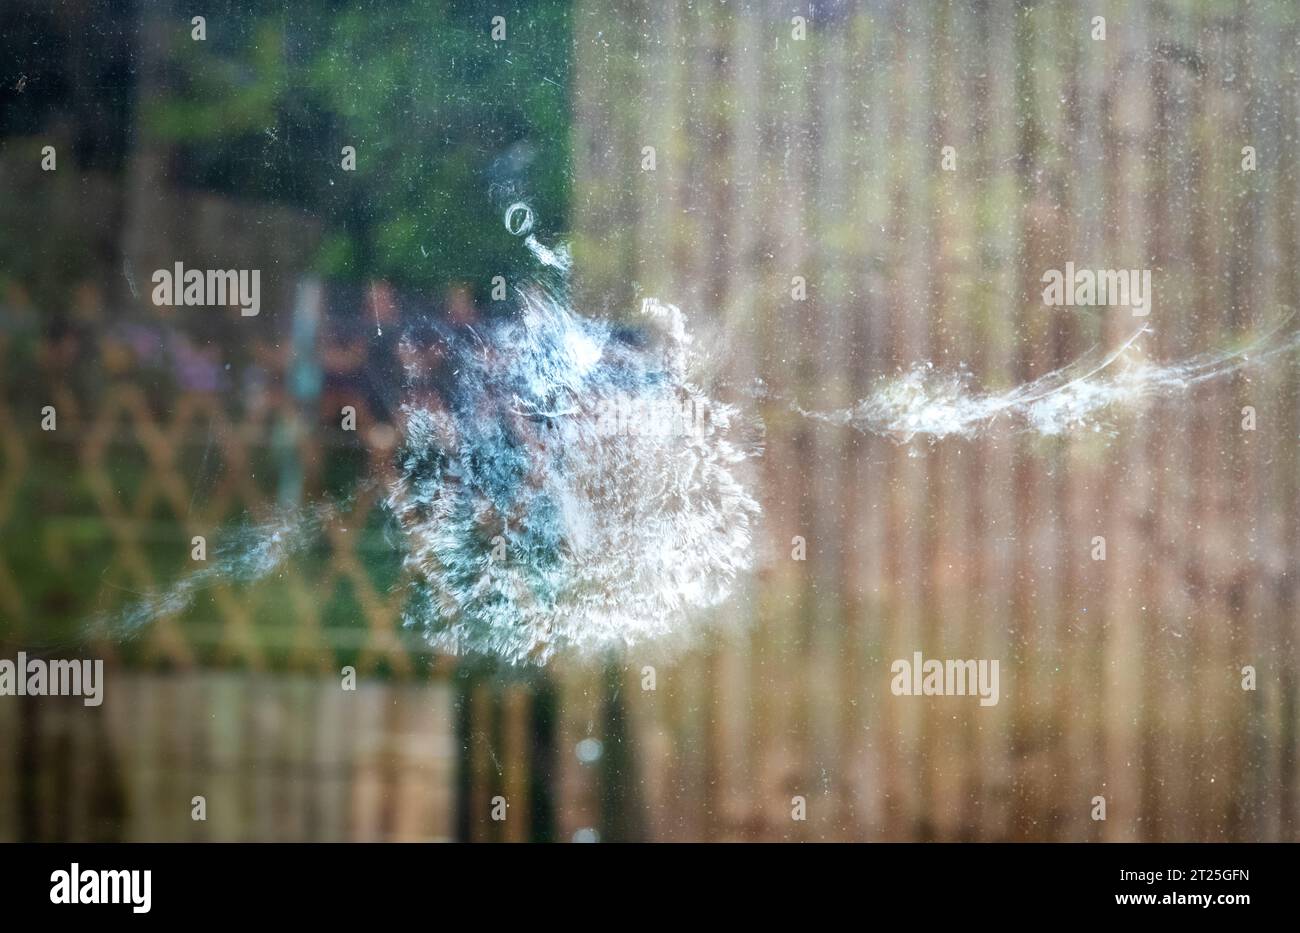 The eye, beak and white bird strike outline imprint of a wood pigeon (Columba palumbus) left after it flew full speed into a sheet of glass on a glass Stock Photo